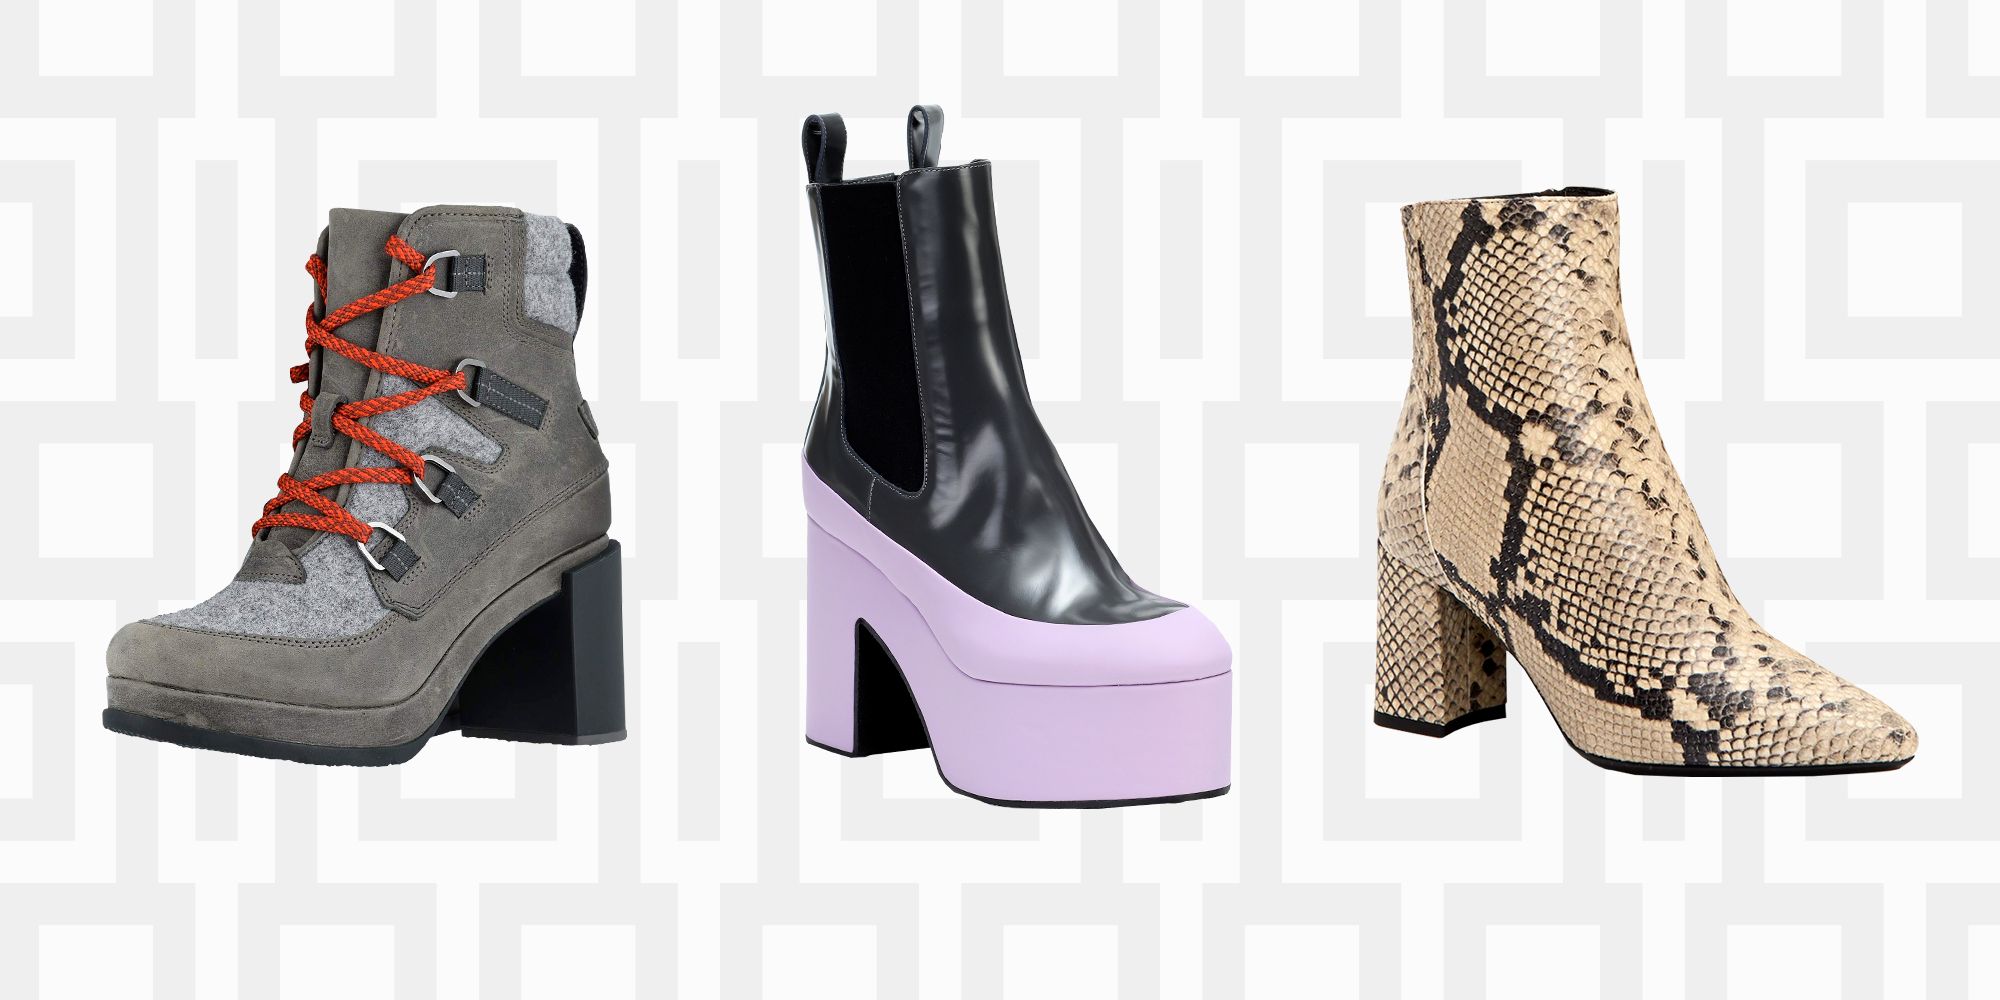 The Weekly Covet: Favorite Winter Boots